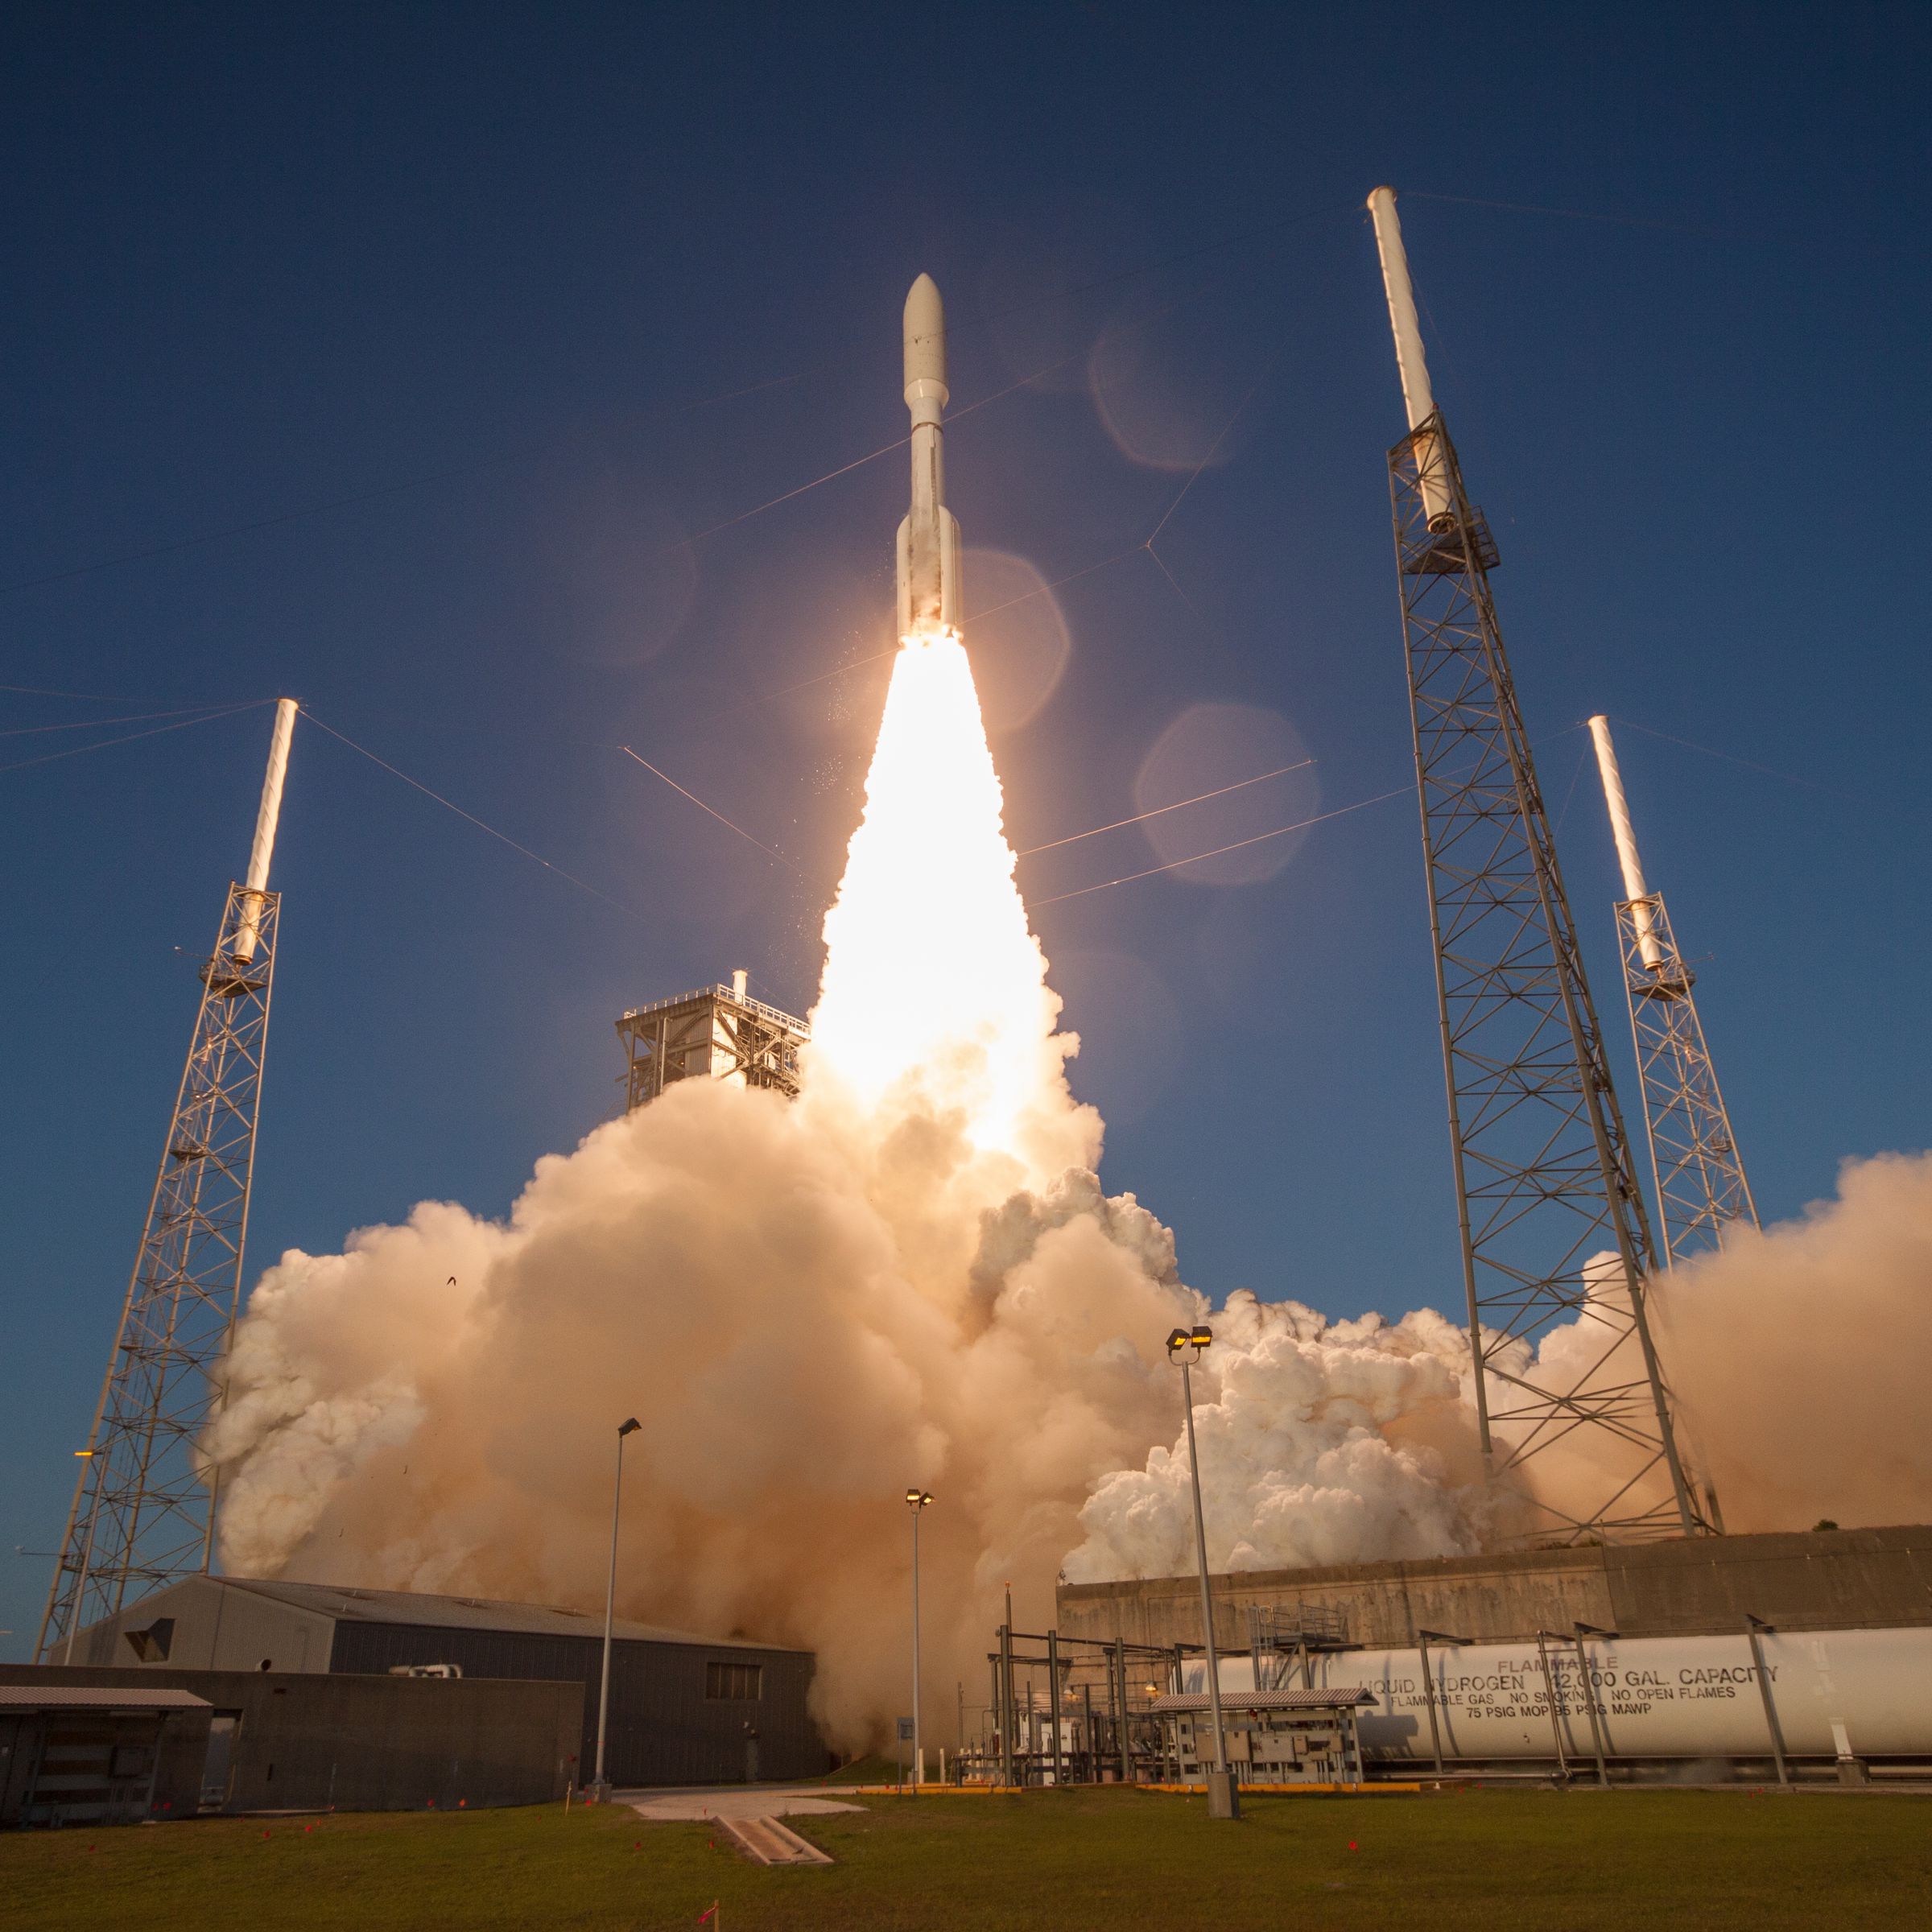 ULA’s Atlas V rocket taking off from Cape Canaveral, Florida